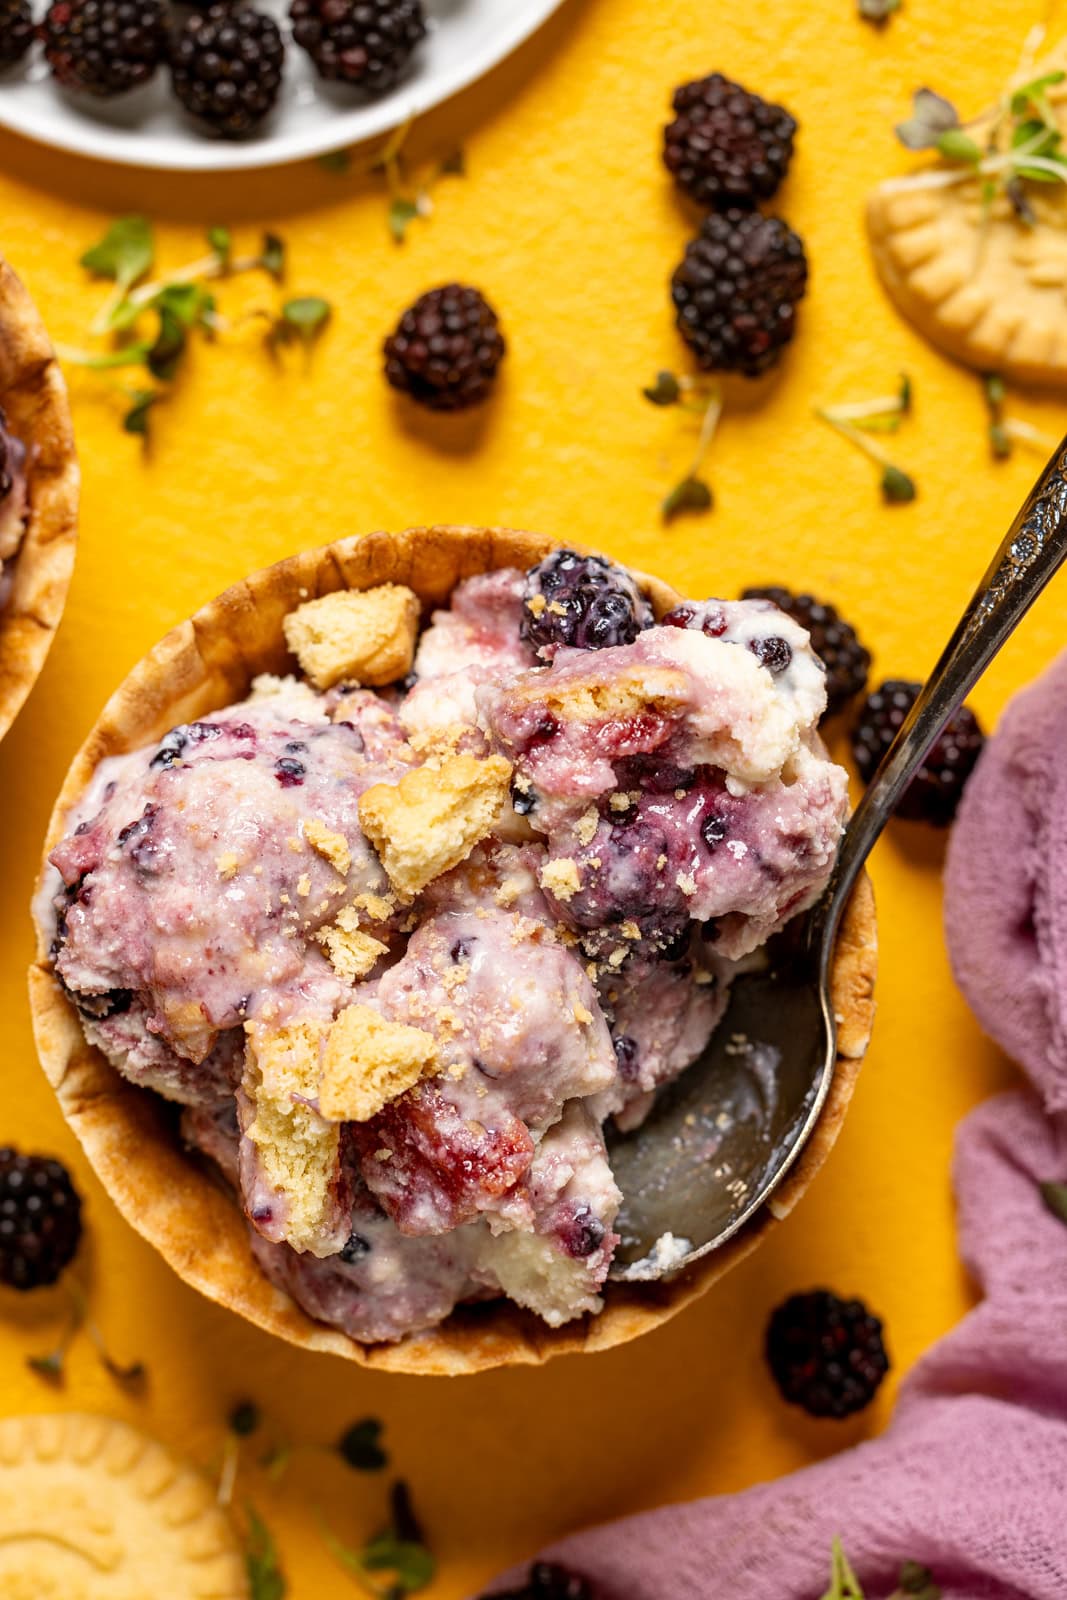 Up close shot of blackberry ice cream with a spoon.